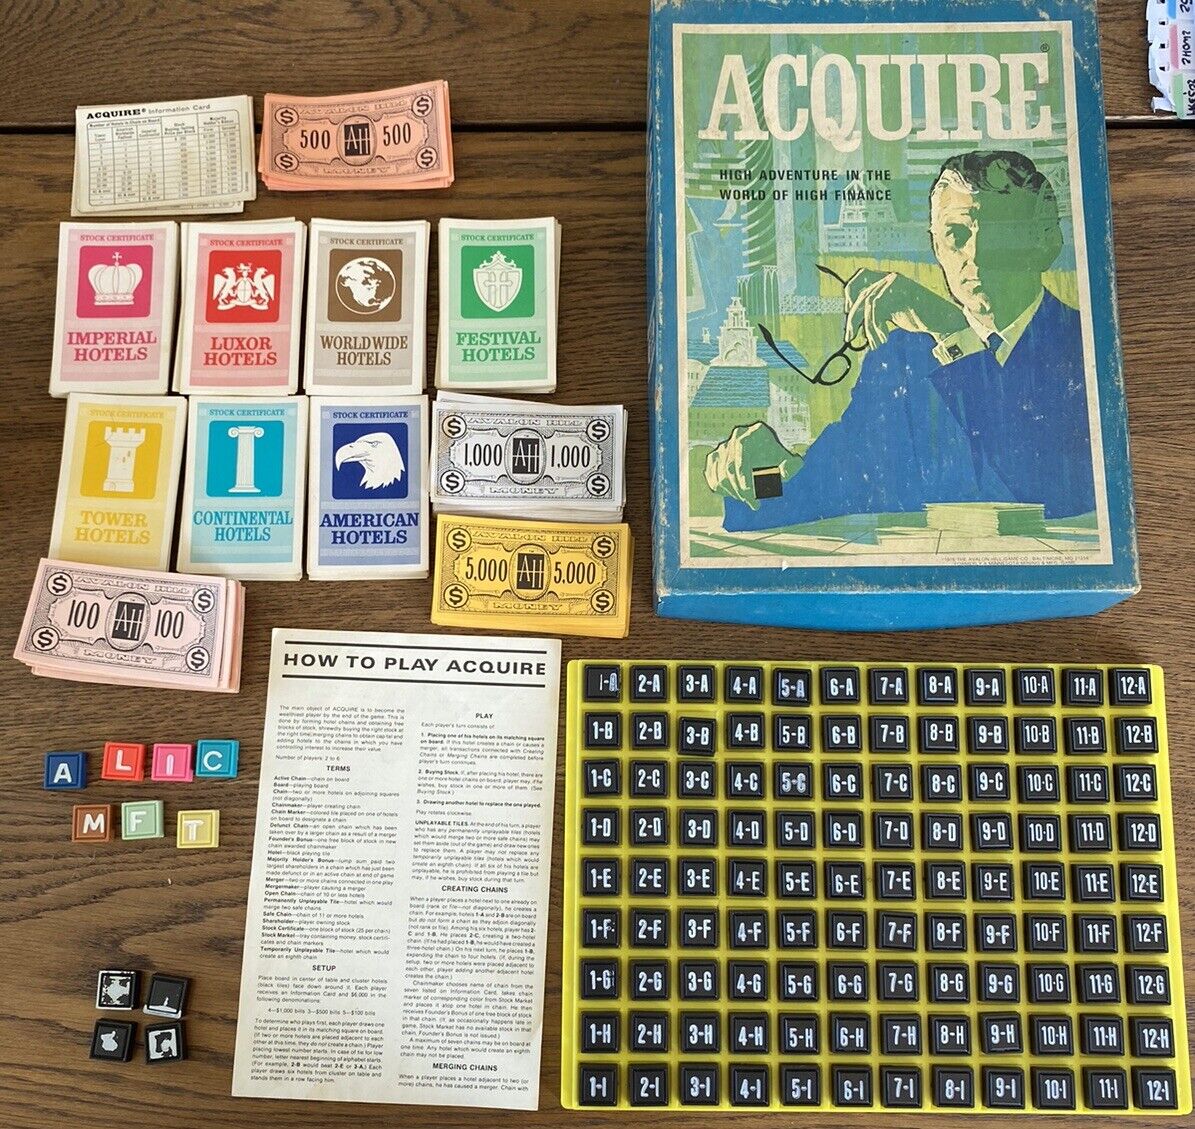 Vintage Acquire board game 1968 3M Bookshelf Game Complete Game